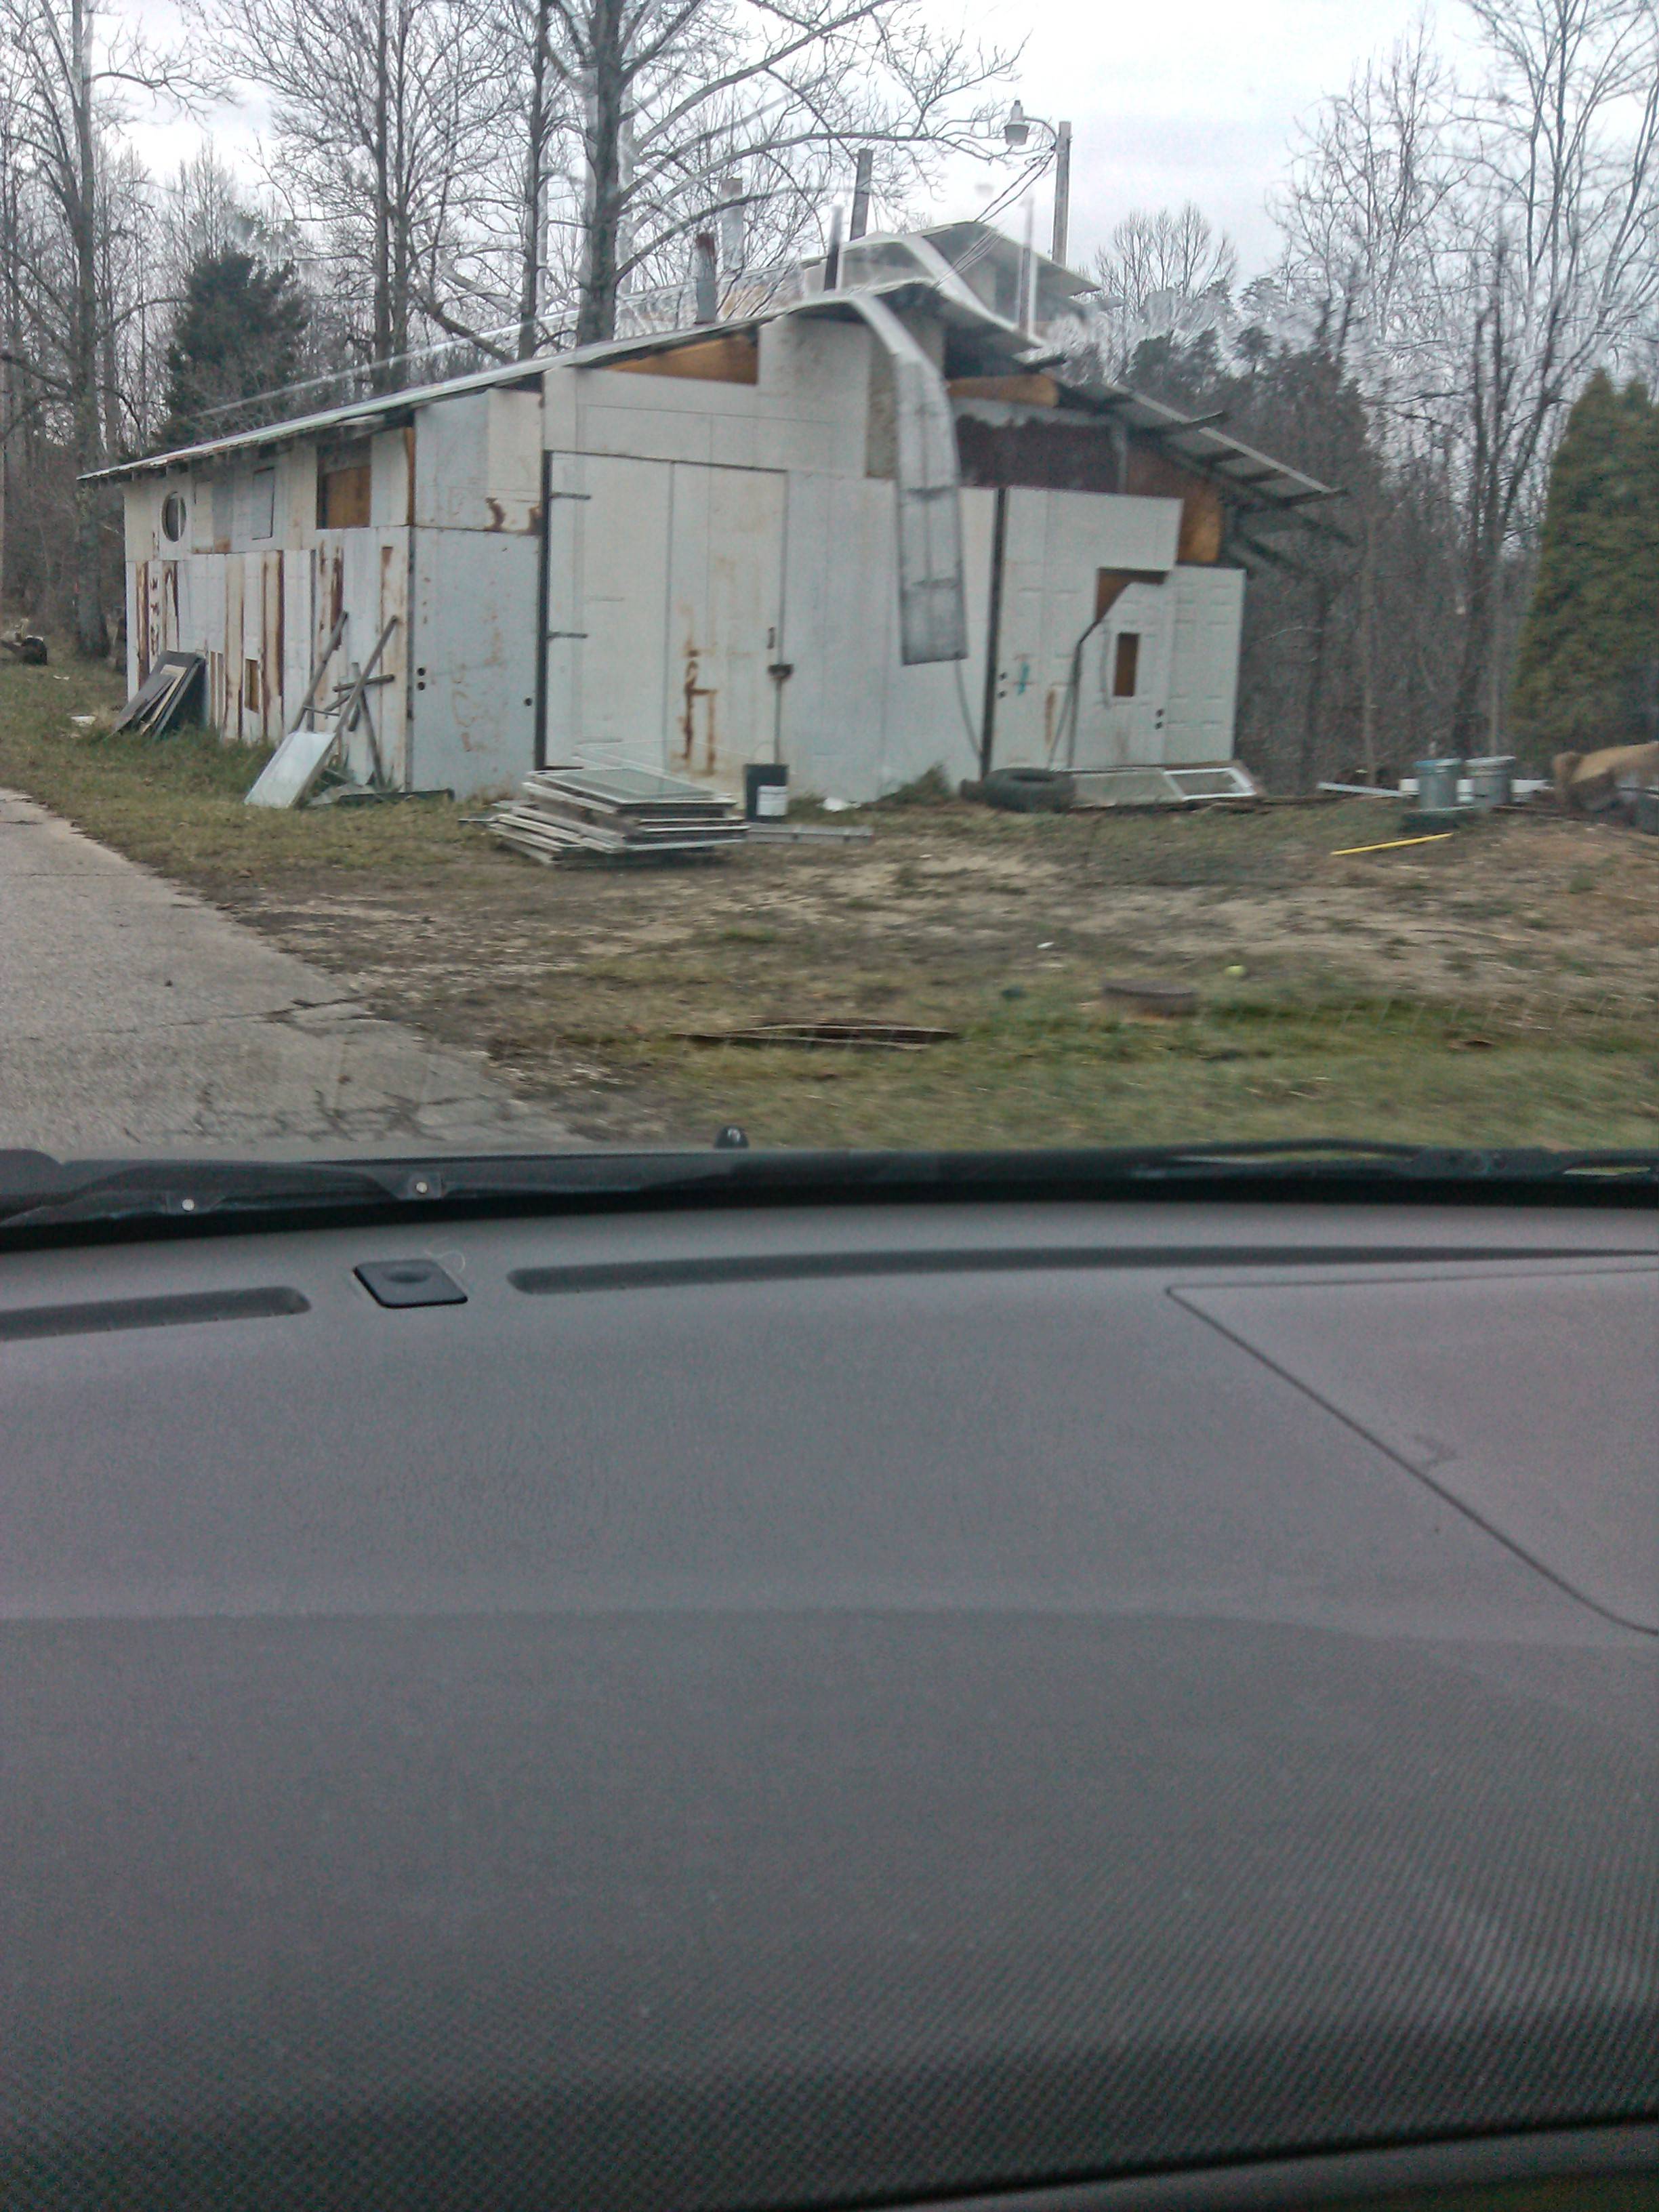 House made out of doors in Kentucky - Imgur